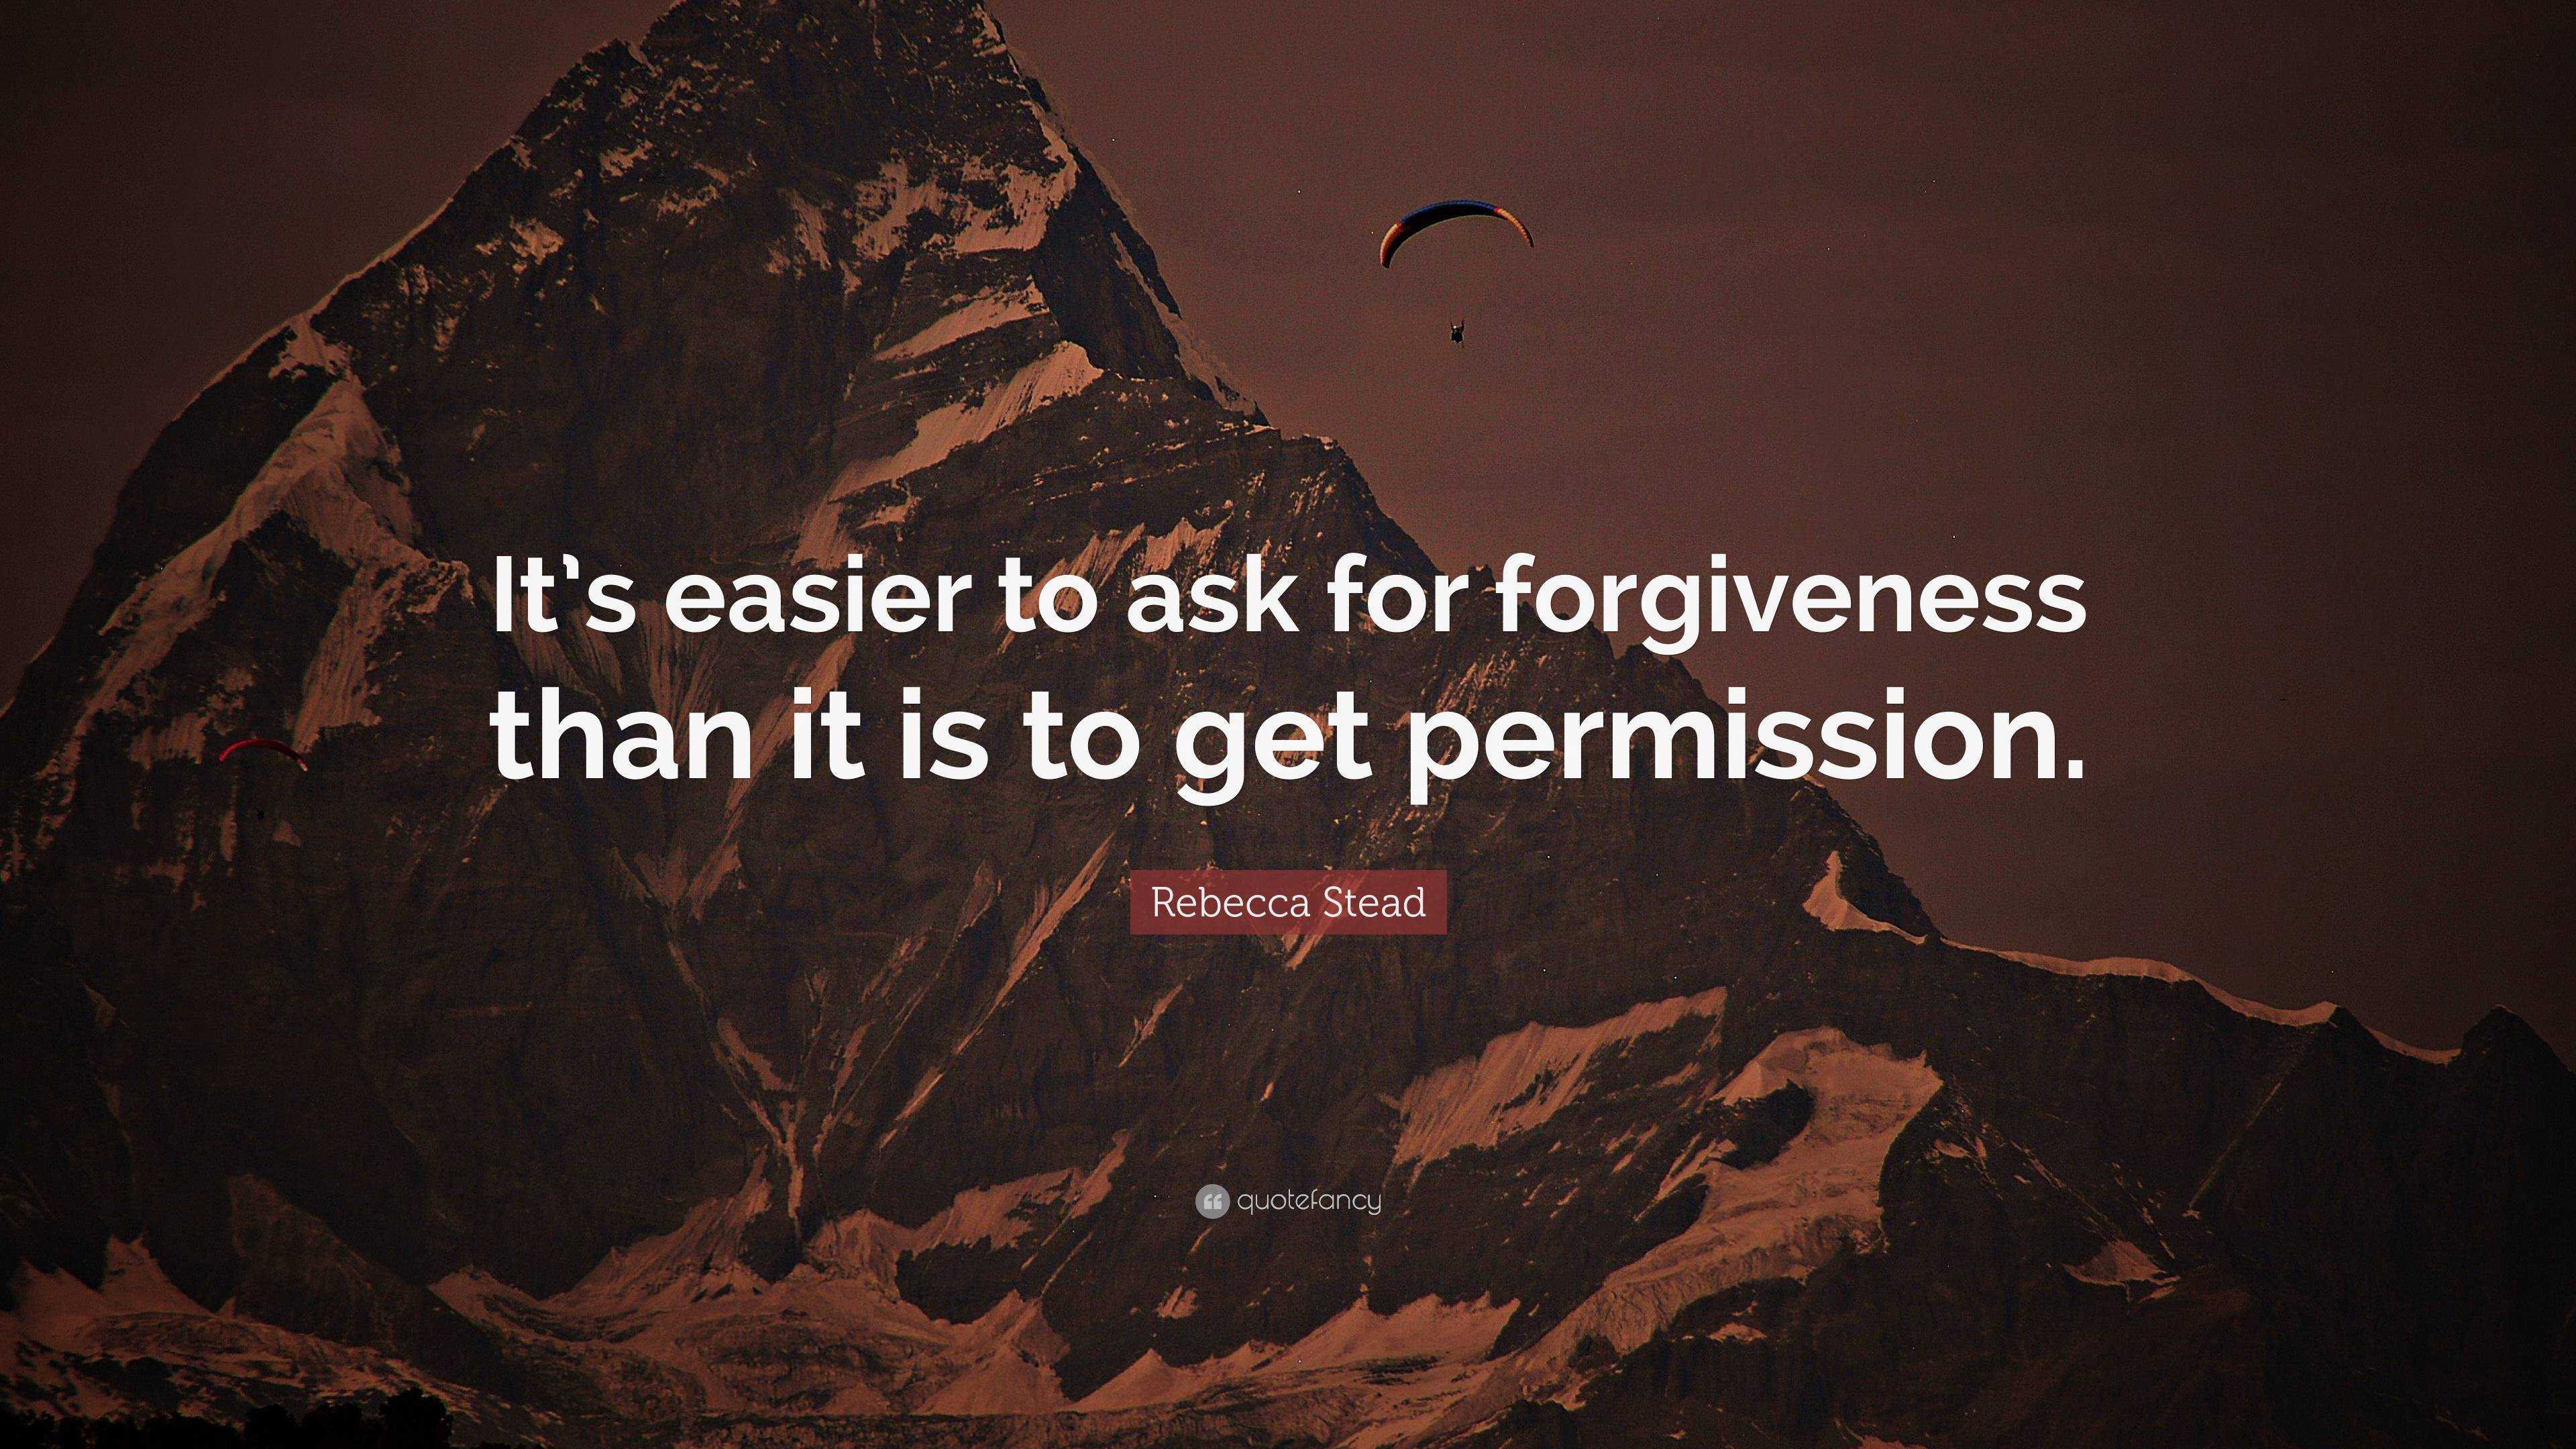 Rebecca Stead Quote “it’s Easier To Ask For Forgiveness Than It Is To Get Permission ”